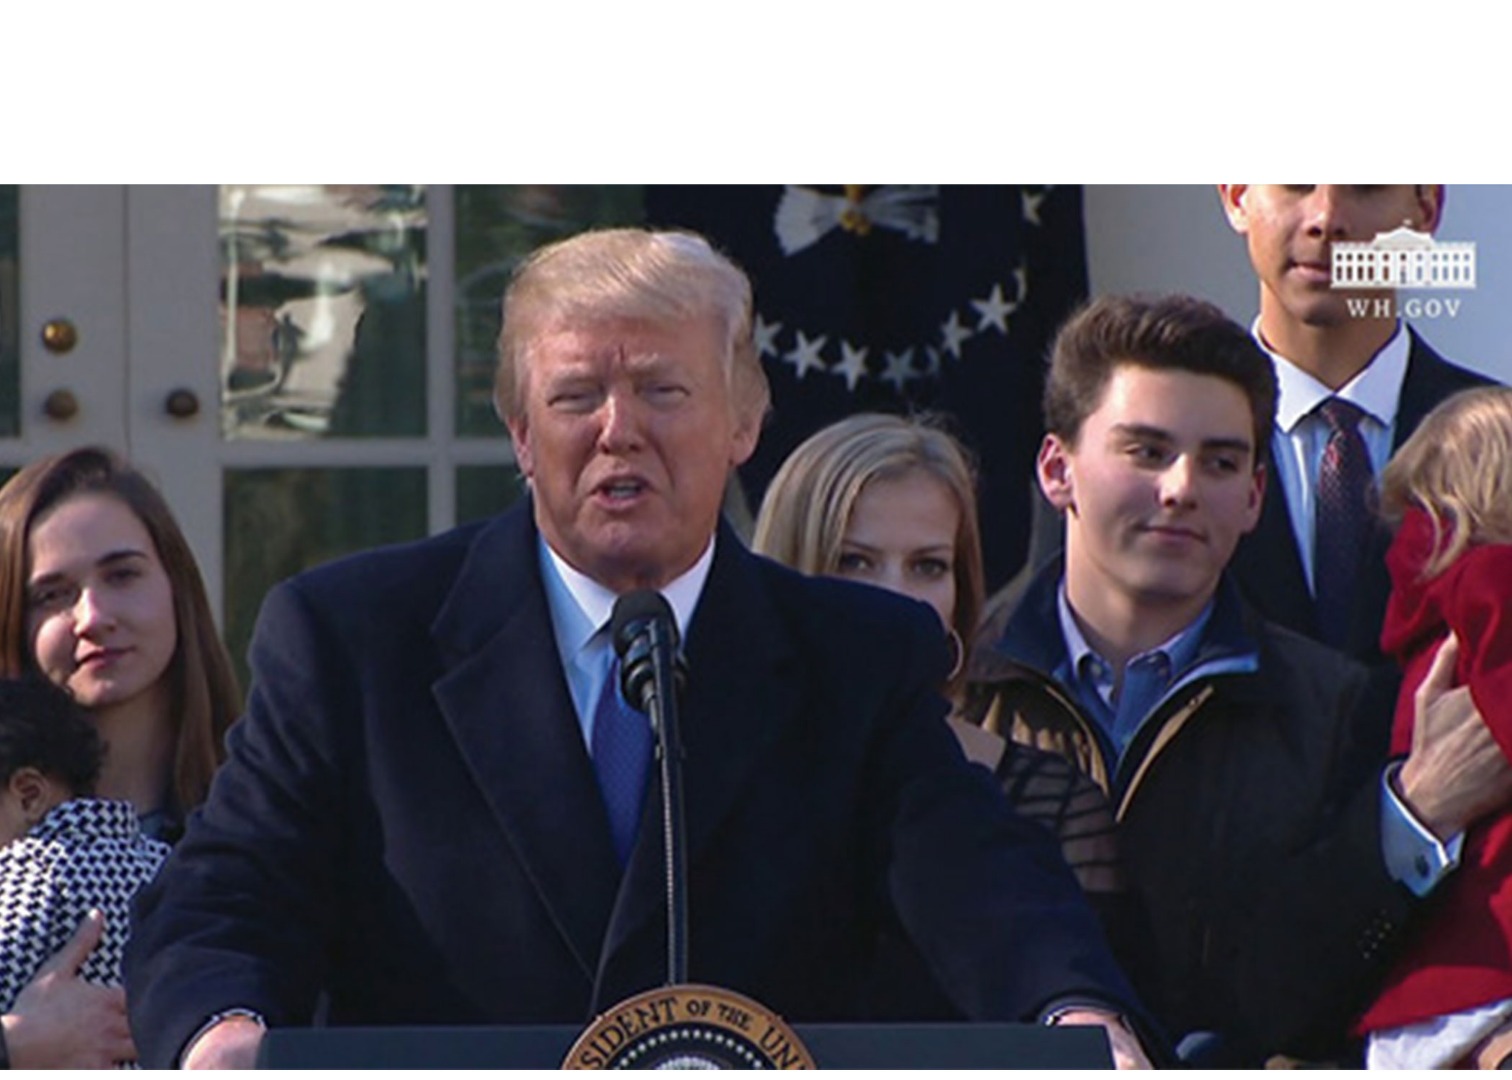 President Trump named Operation Rescue Pro-Life Person of the Year